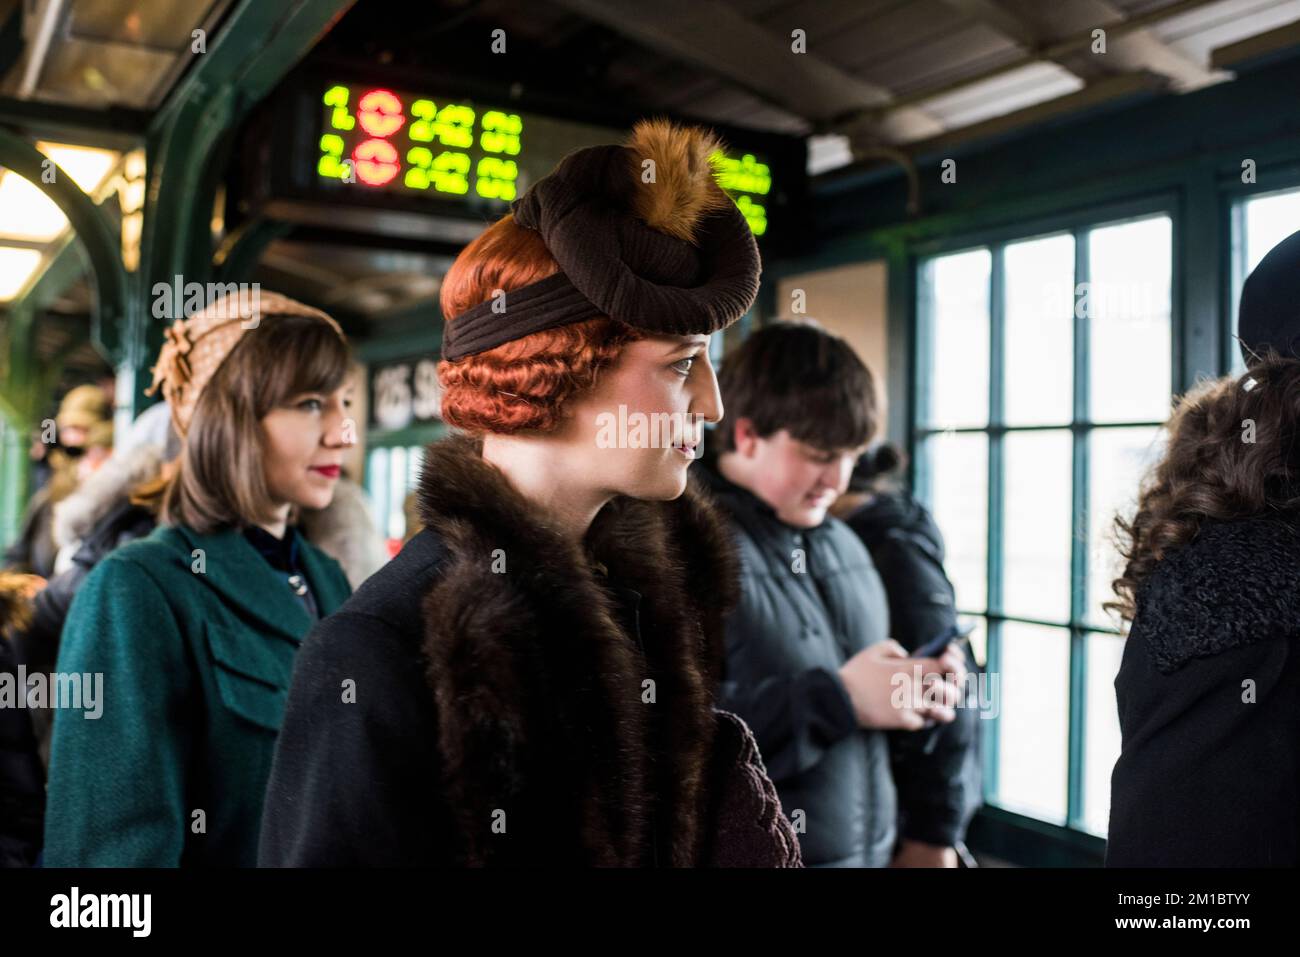 New York City, New York - December 11, 2022: People in period clothing waiting for the Train of Many Colors, Holiday Nostalgia Rides, NYC Stock Photo